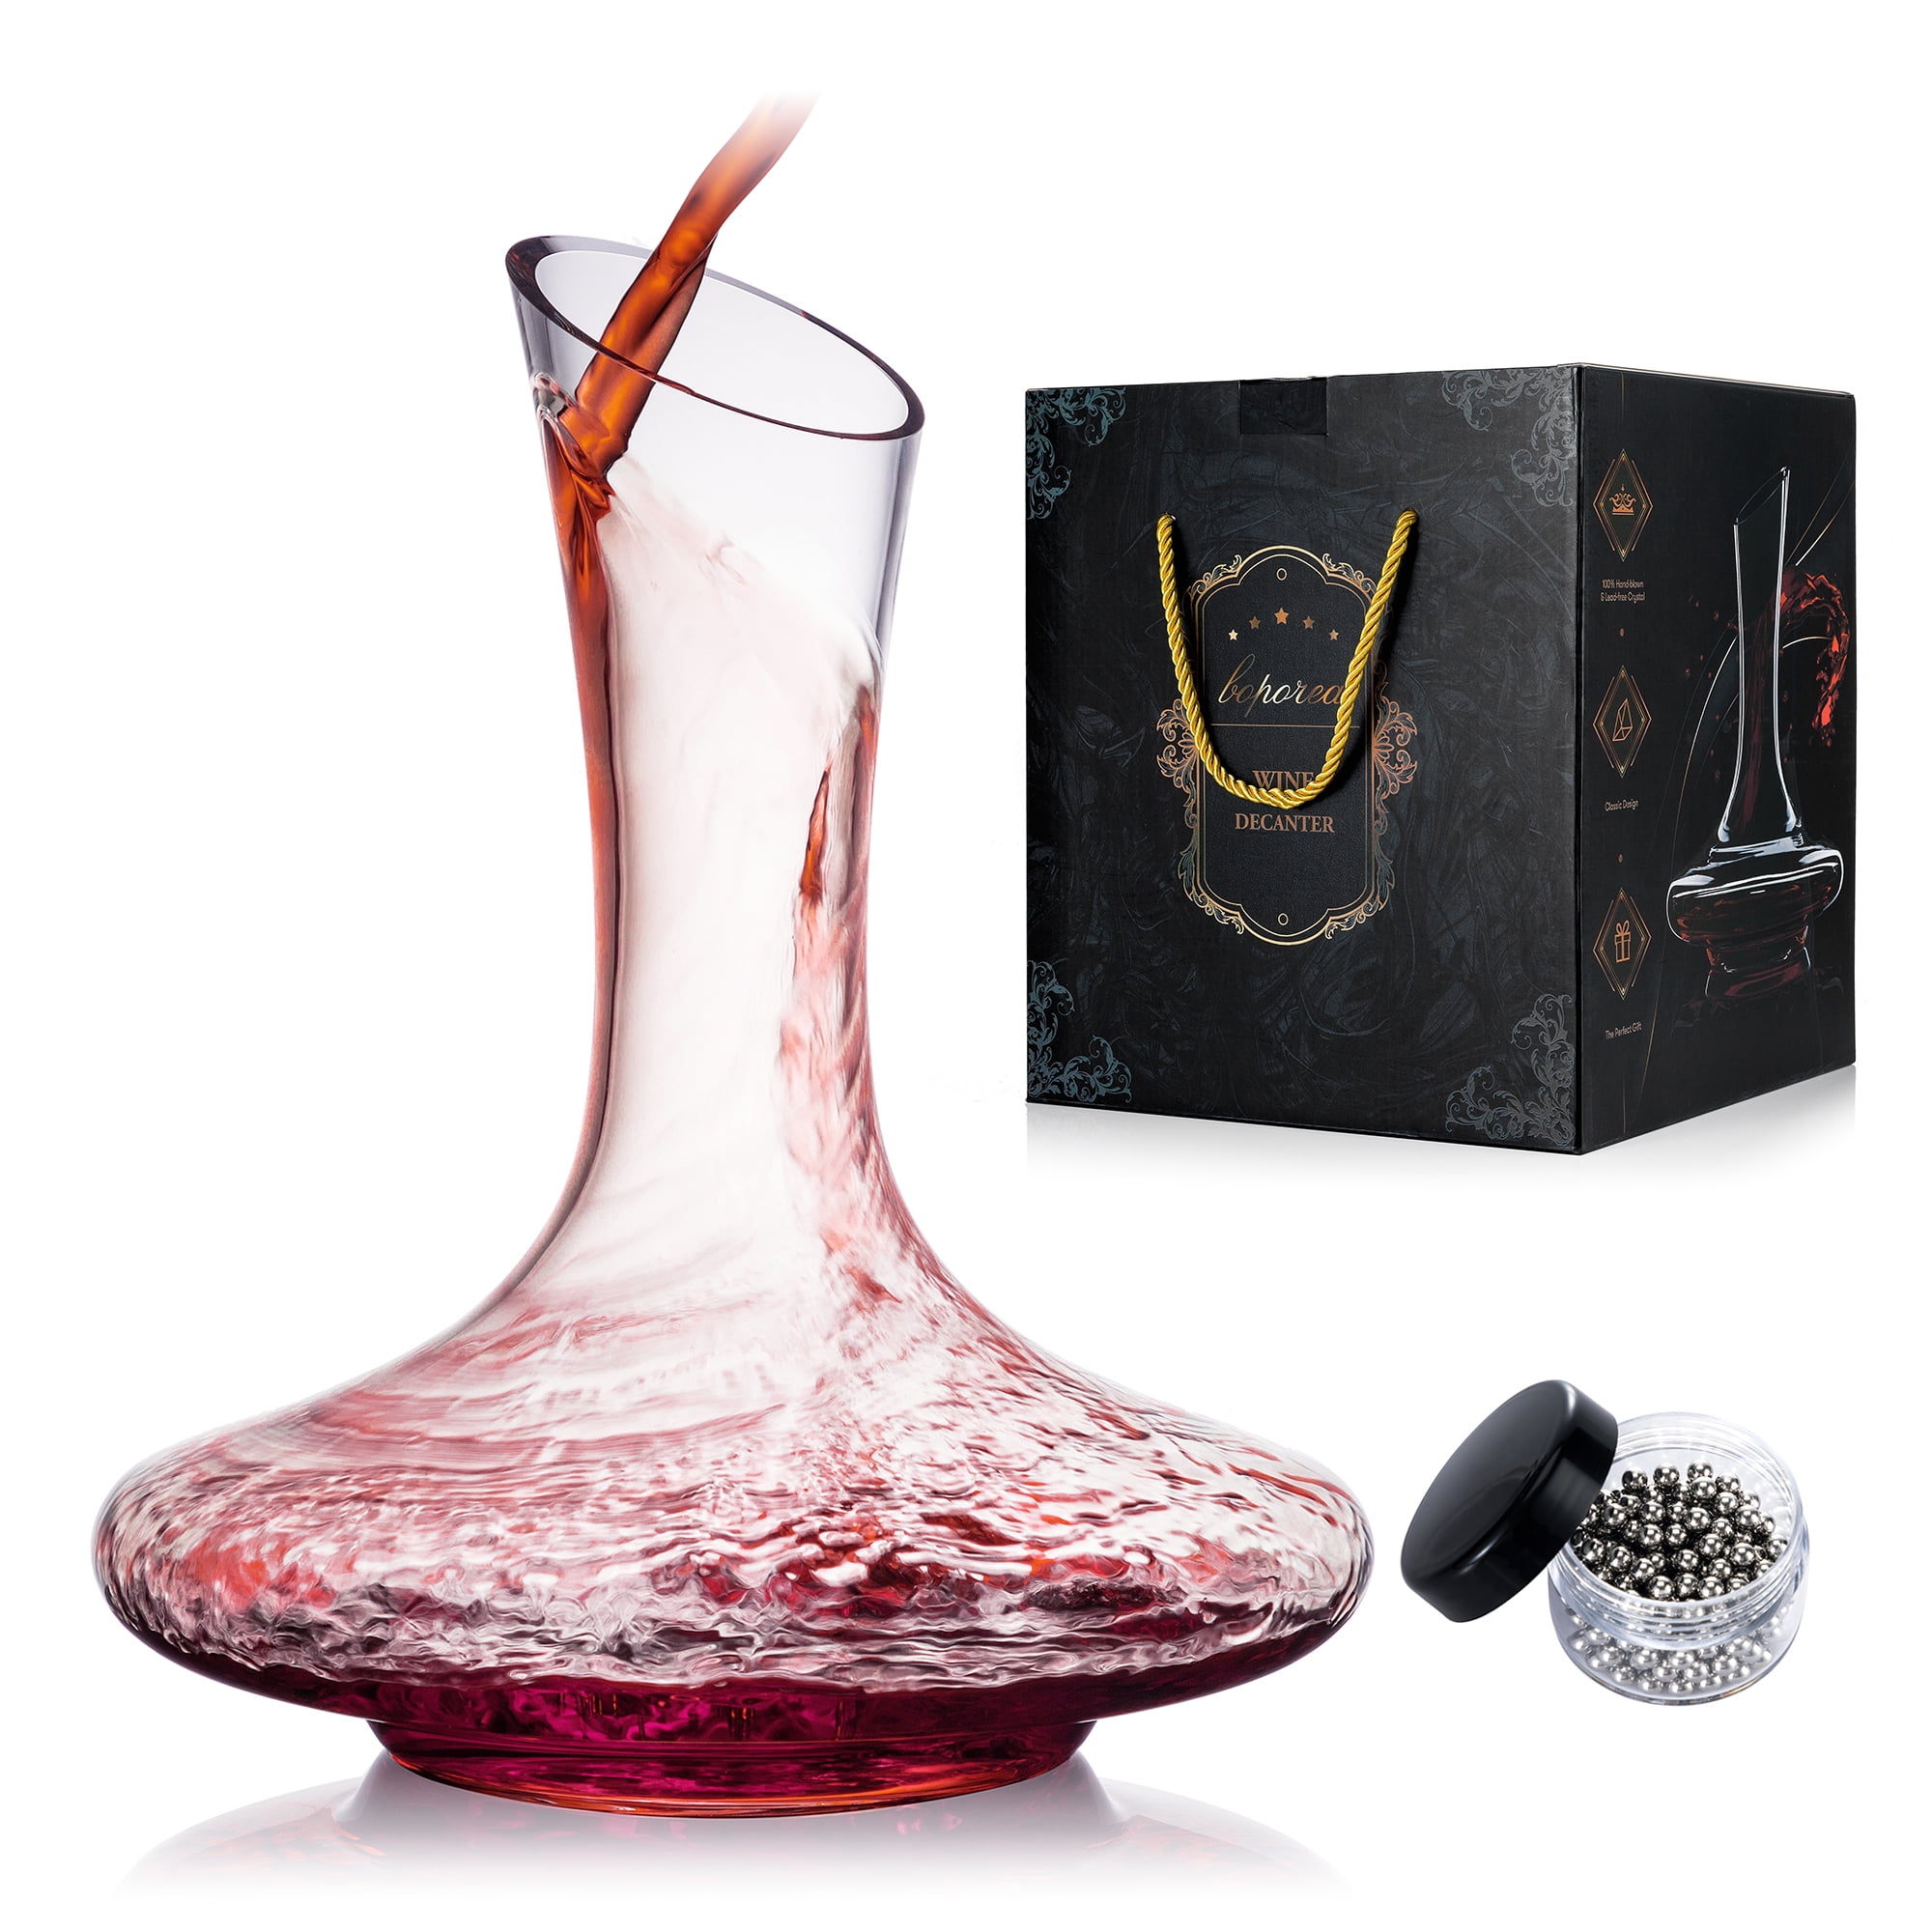 YouYah Wine Decanter Set,Red Wine Carafe with Built-in-Aerator,Wine  Aerator,Wine Gifts for Christmas,Stainless Steel Pourer Lid,Filter,100%  Hand Blown